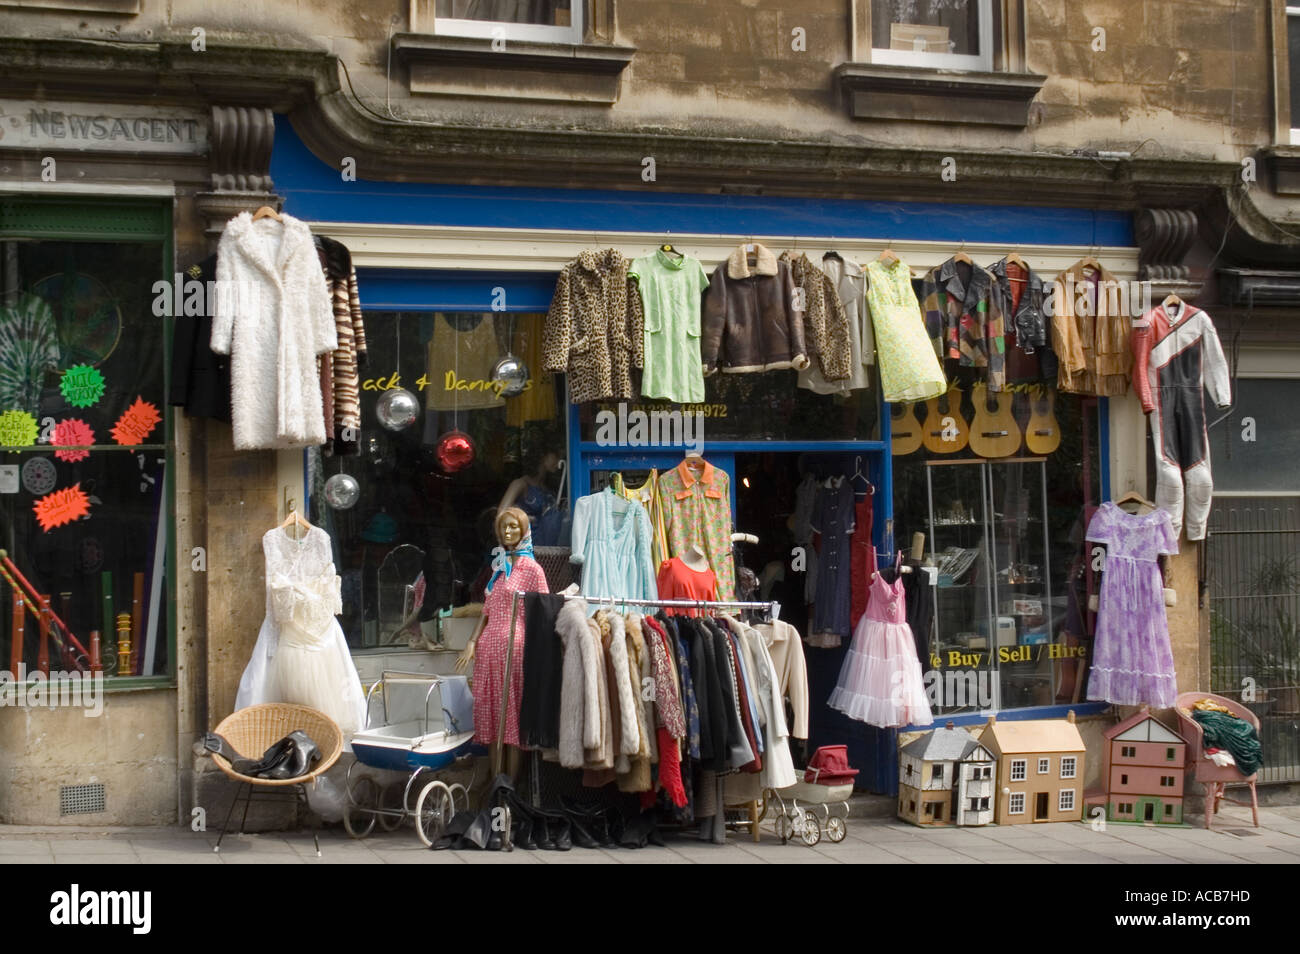 Shop selling antique clothes and bric a brac on Walcot Street BATH England UK Stock Photo